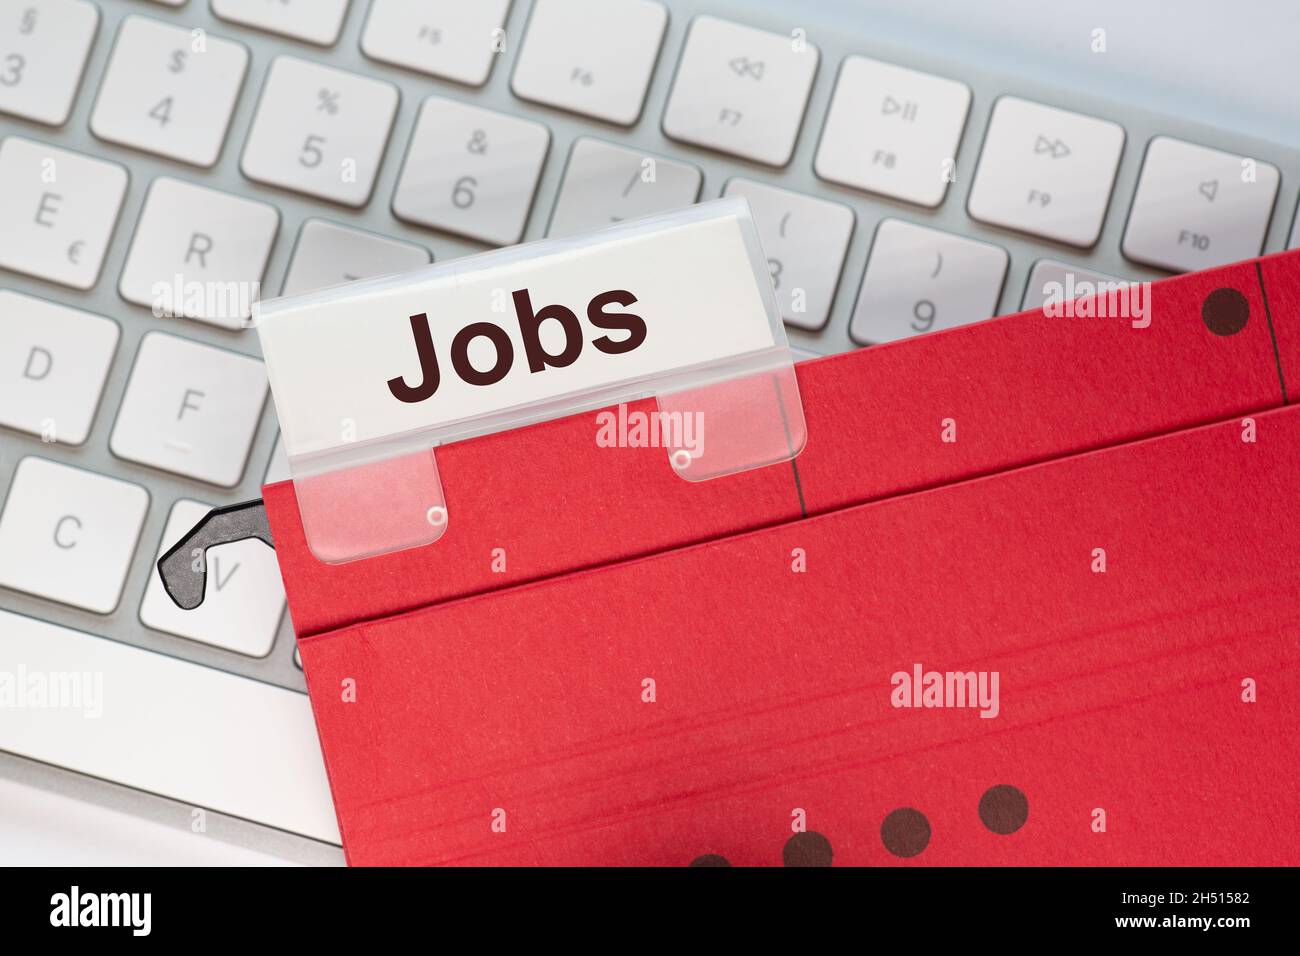 red hanging folder on a keyboard has a tab with the word Jobs on it Stock Photo